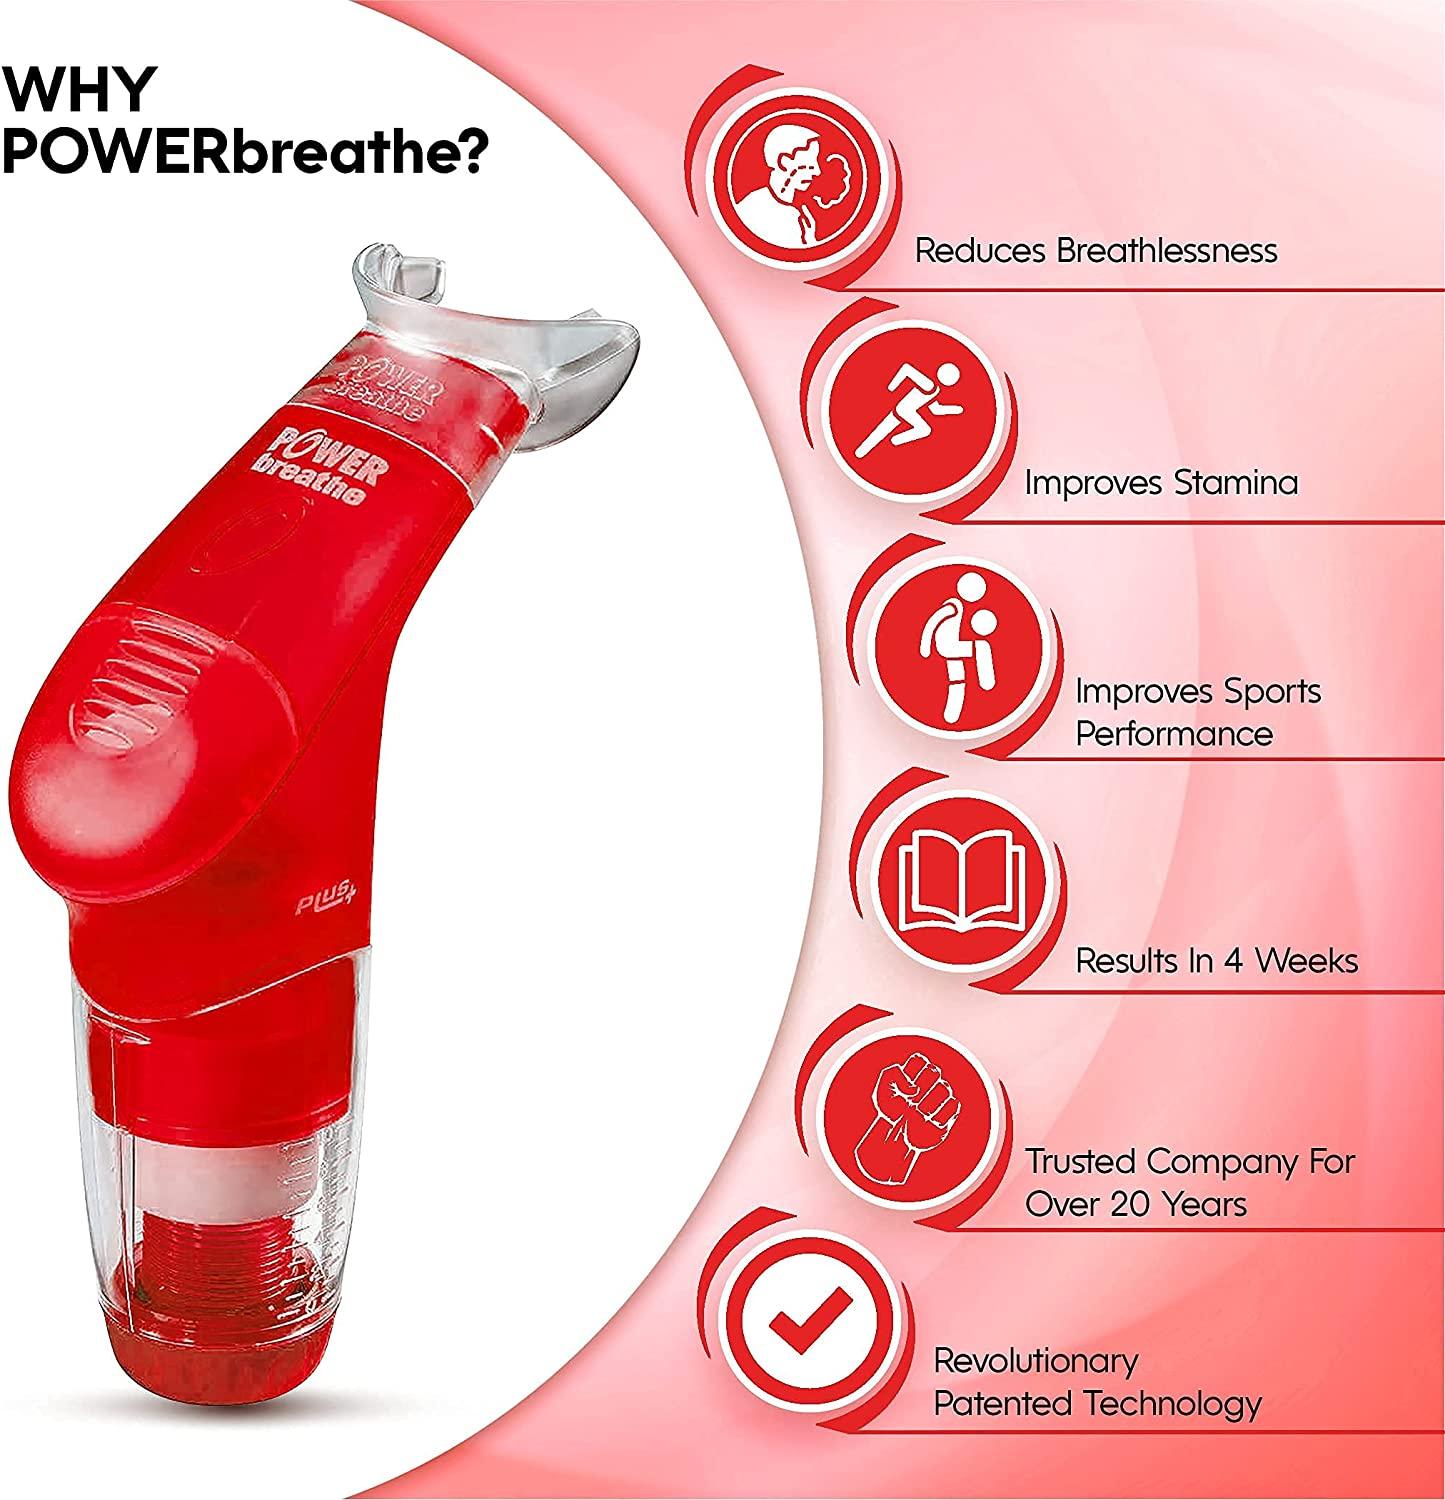 POWERBREATHE - Breathing Exercise Device, Breathing Trainer and Therapy  Tool to Strengthen Breathing Muscles and Help Lung Capacity, Handheld  Inspiratory Muscle Trainer Red, Heavy Resistance